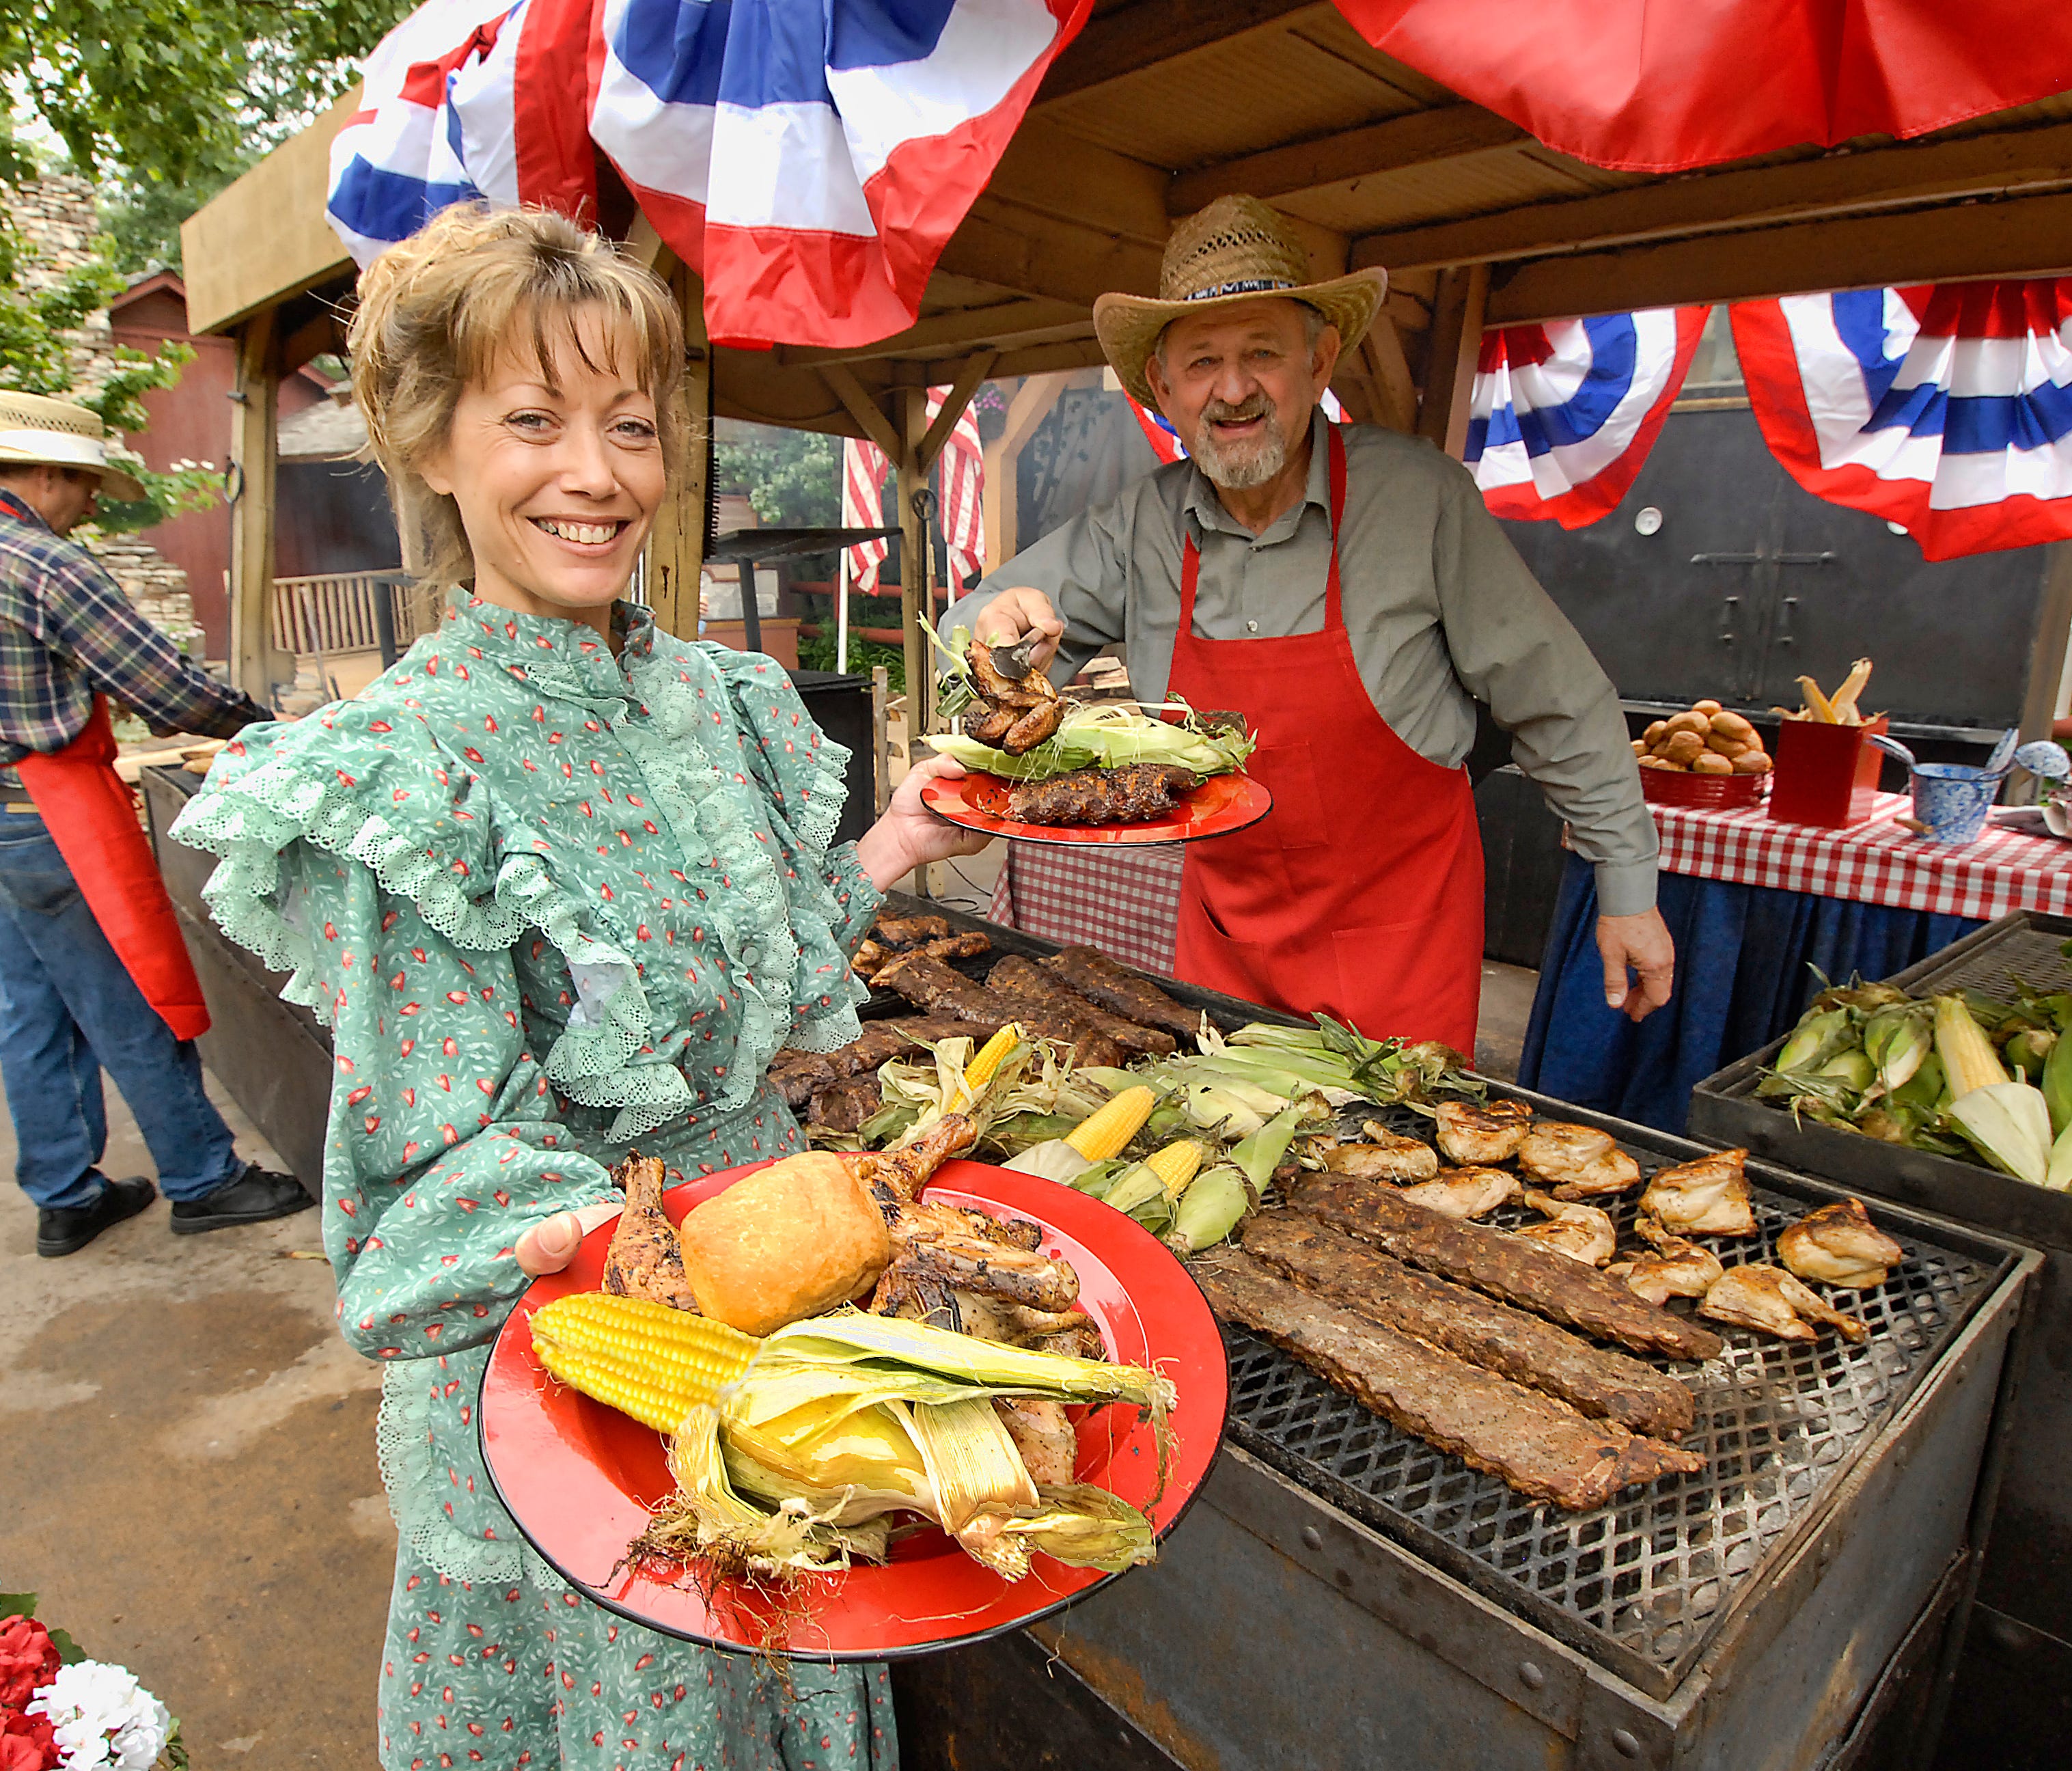 Through Memorial Day (May 28), Silver Dollar City in Branson, Mo. is presenting its annual Bluegrass and BBQ Festival.